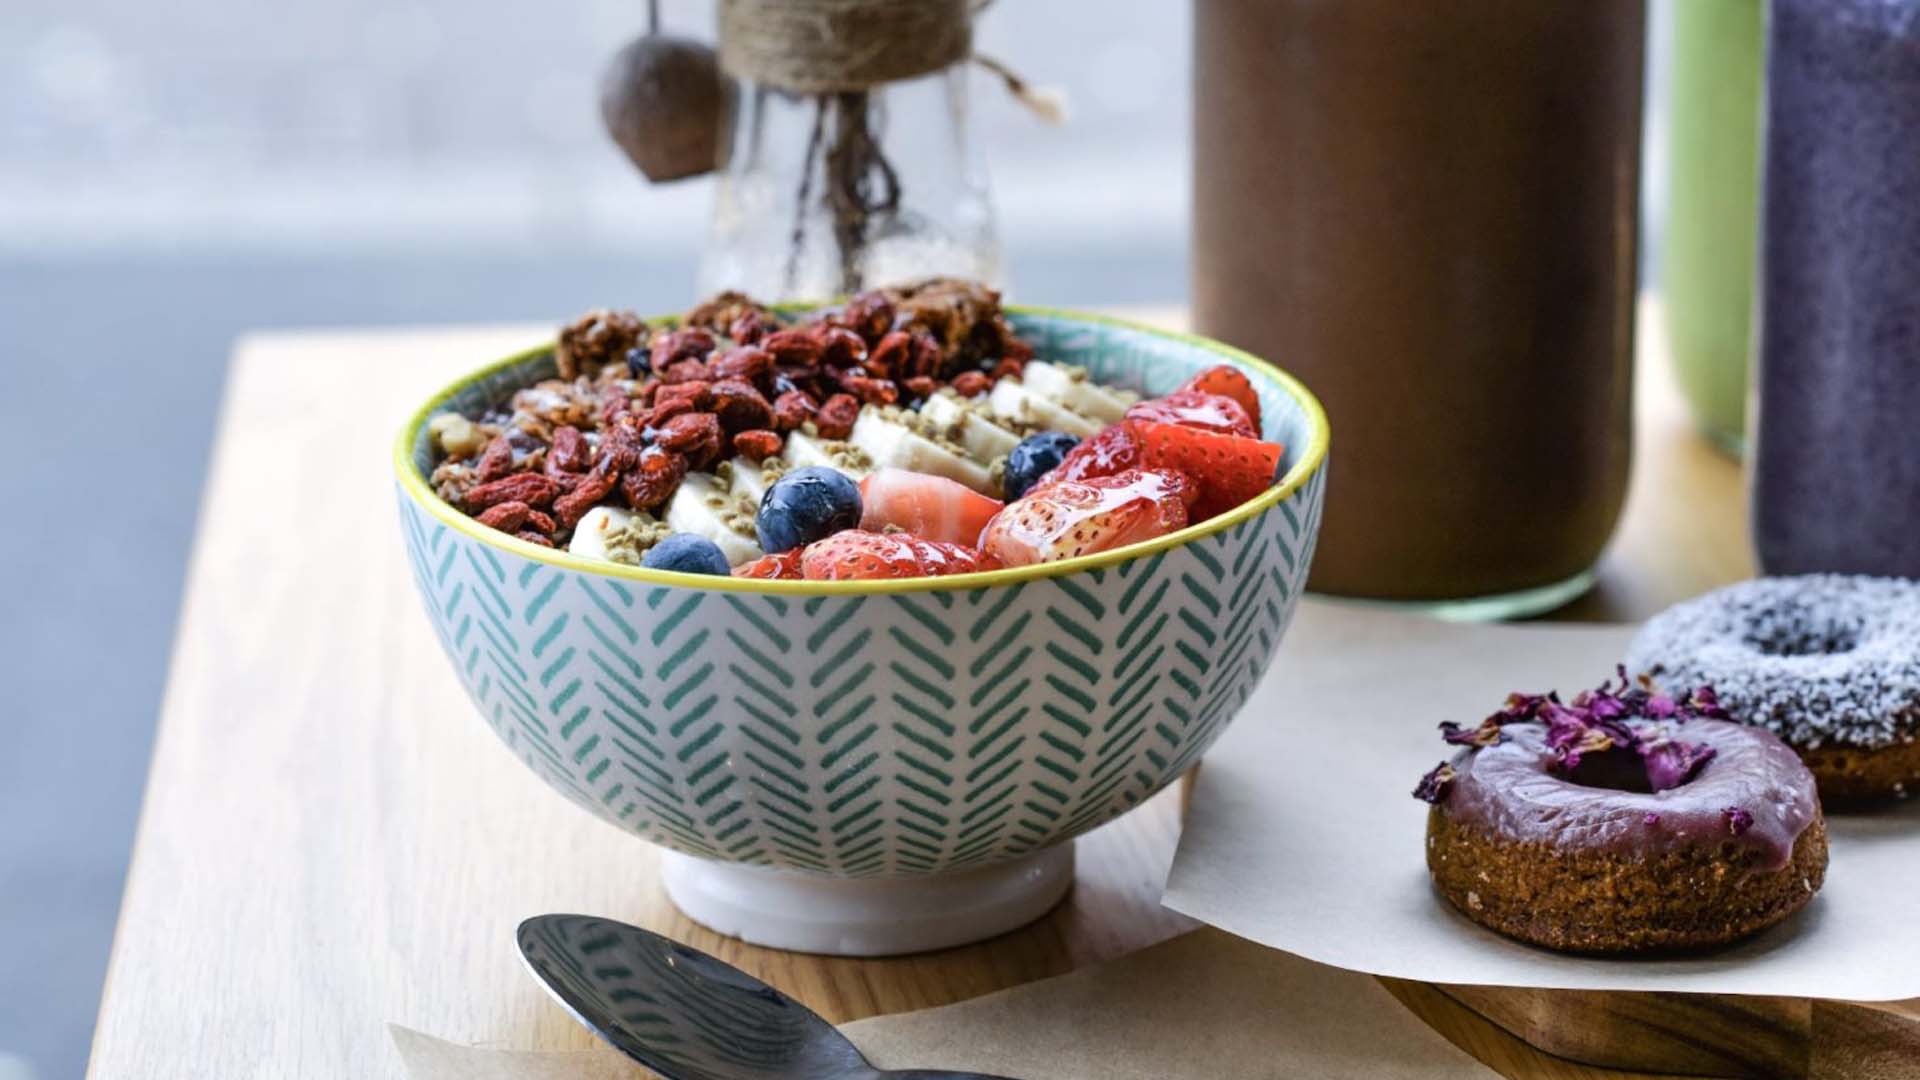 acai breakfast bowls from Bare Naked Bowls in Manly. Home to some of the best breakfast in Sydney.